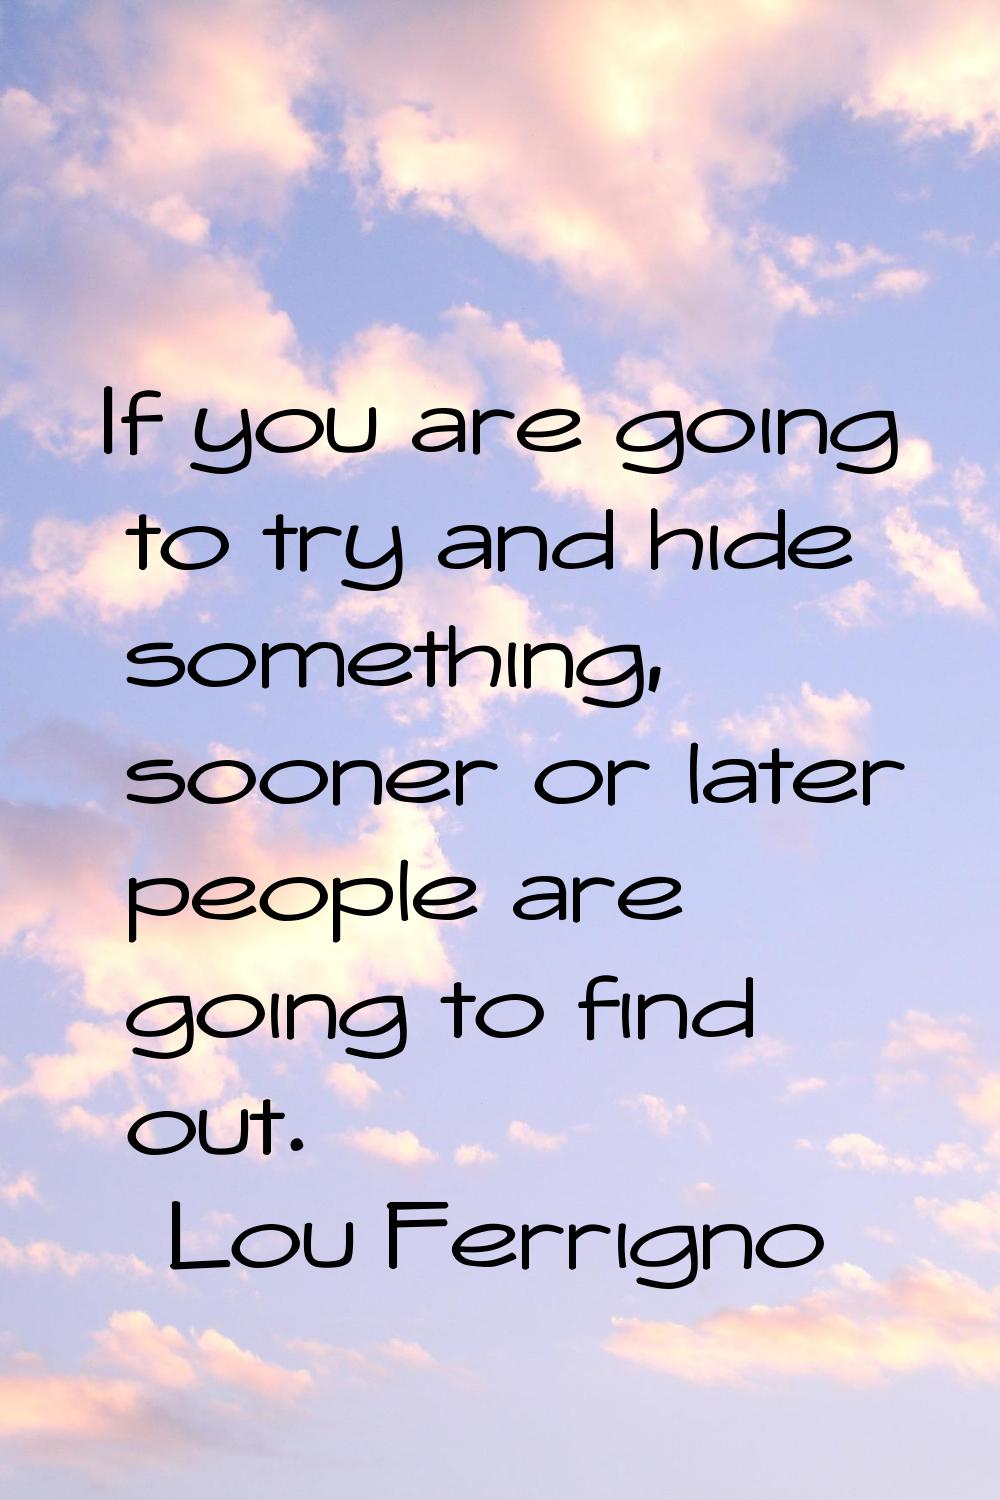 If you are going to try and hide something, sooner or later people are going to find out.